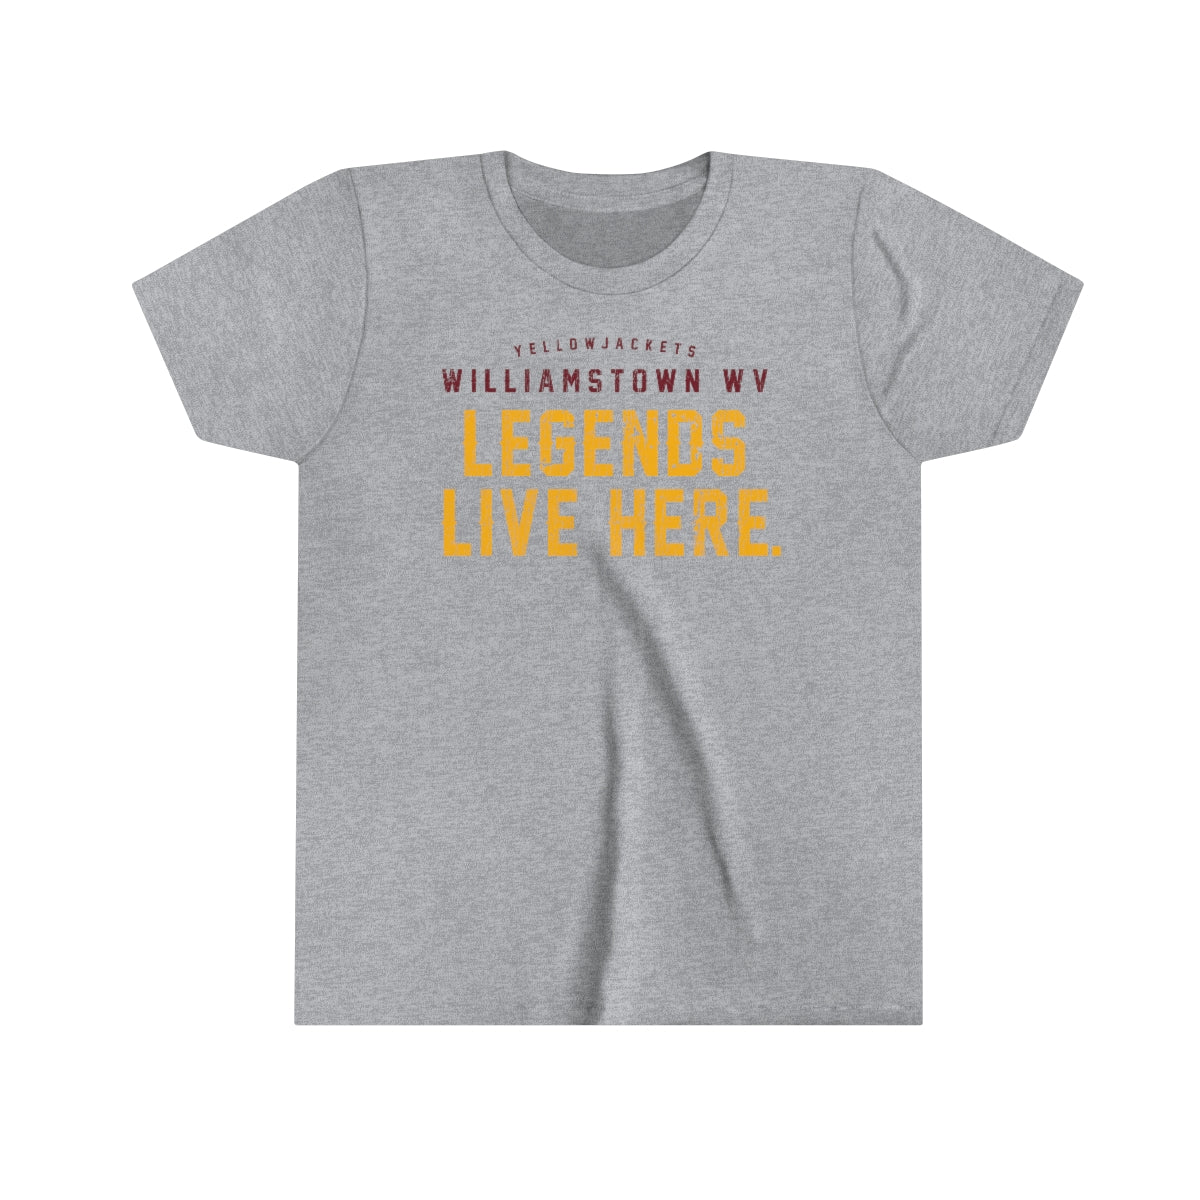 LEGENDS LIVE HERE. WILLIAMSTOWN WV-Youth Short Sleeve Tee